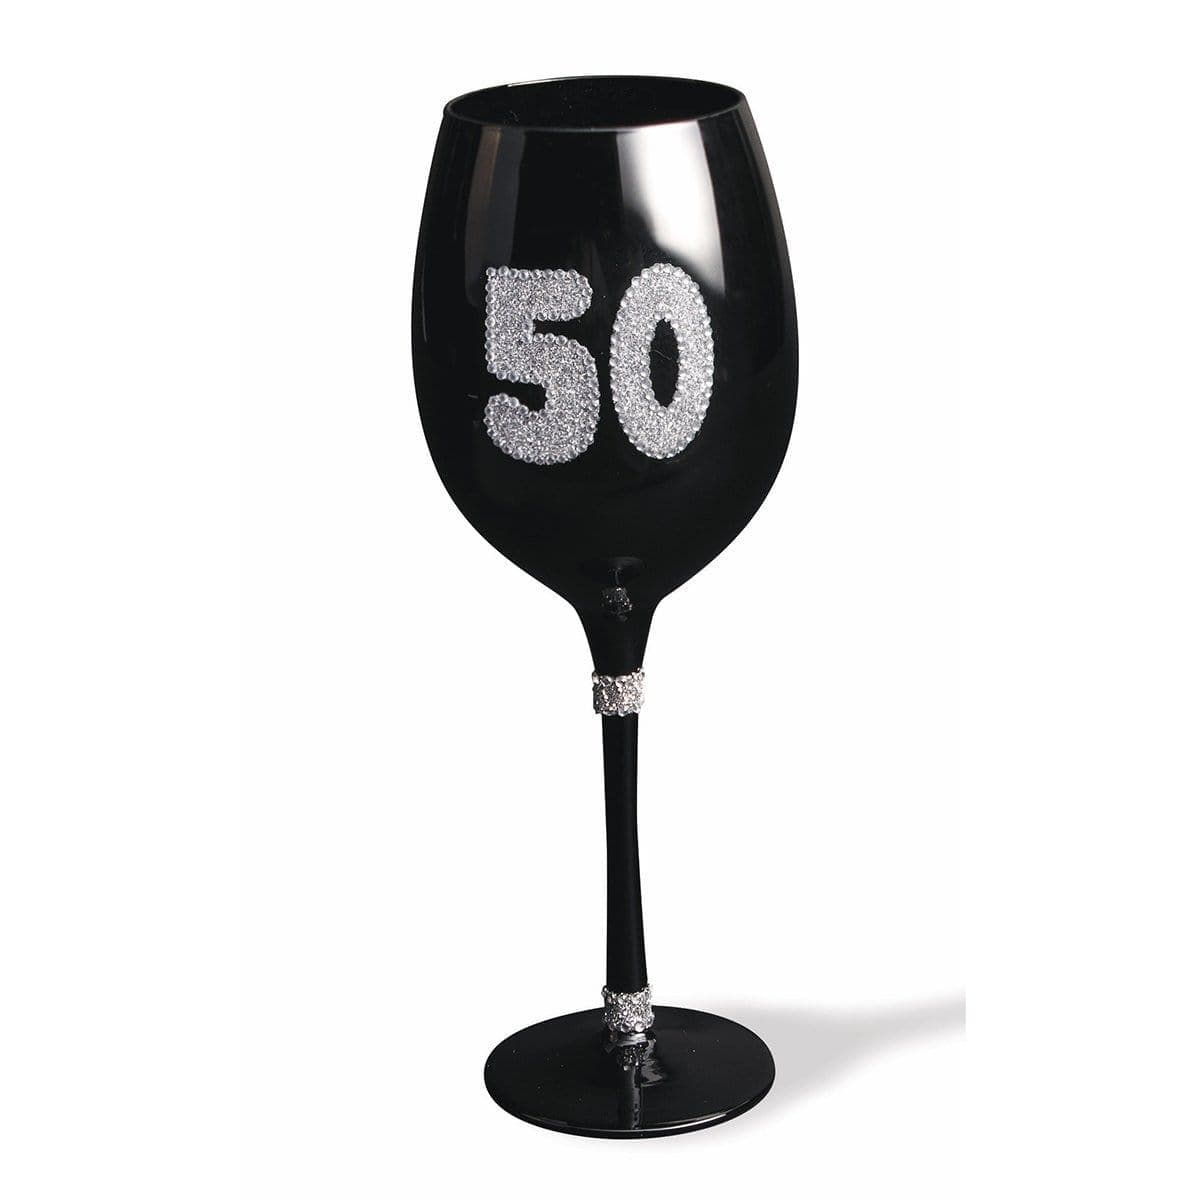 Buy Age Specific Birthday 50th Birthday - Black Wine Glass sold at Party Expert